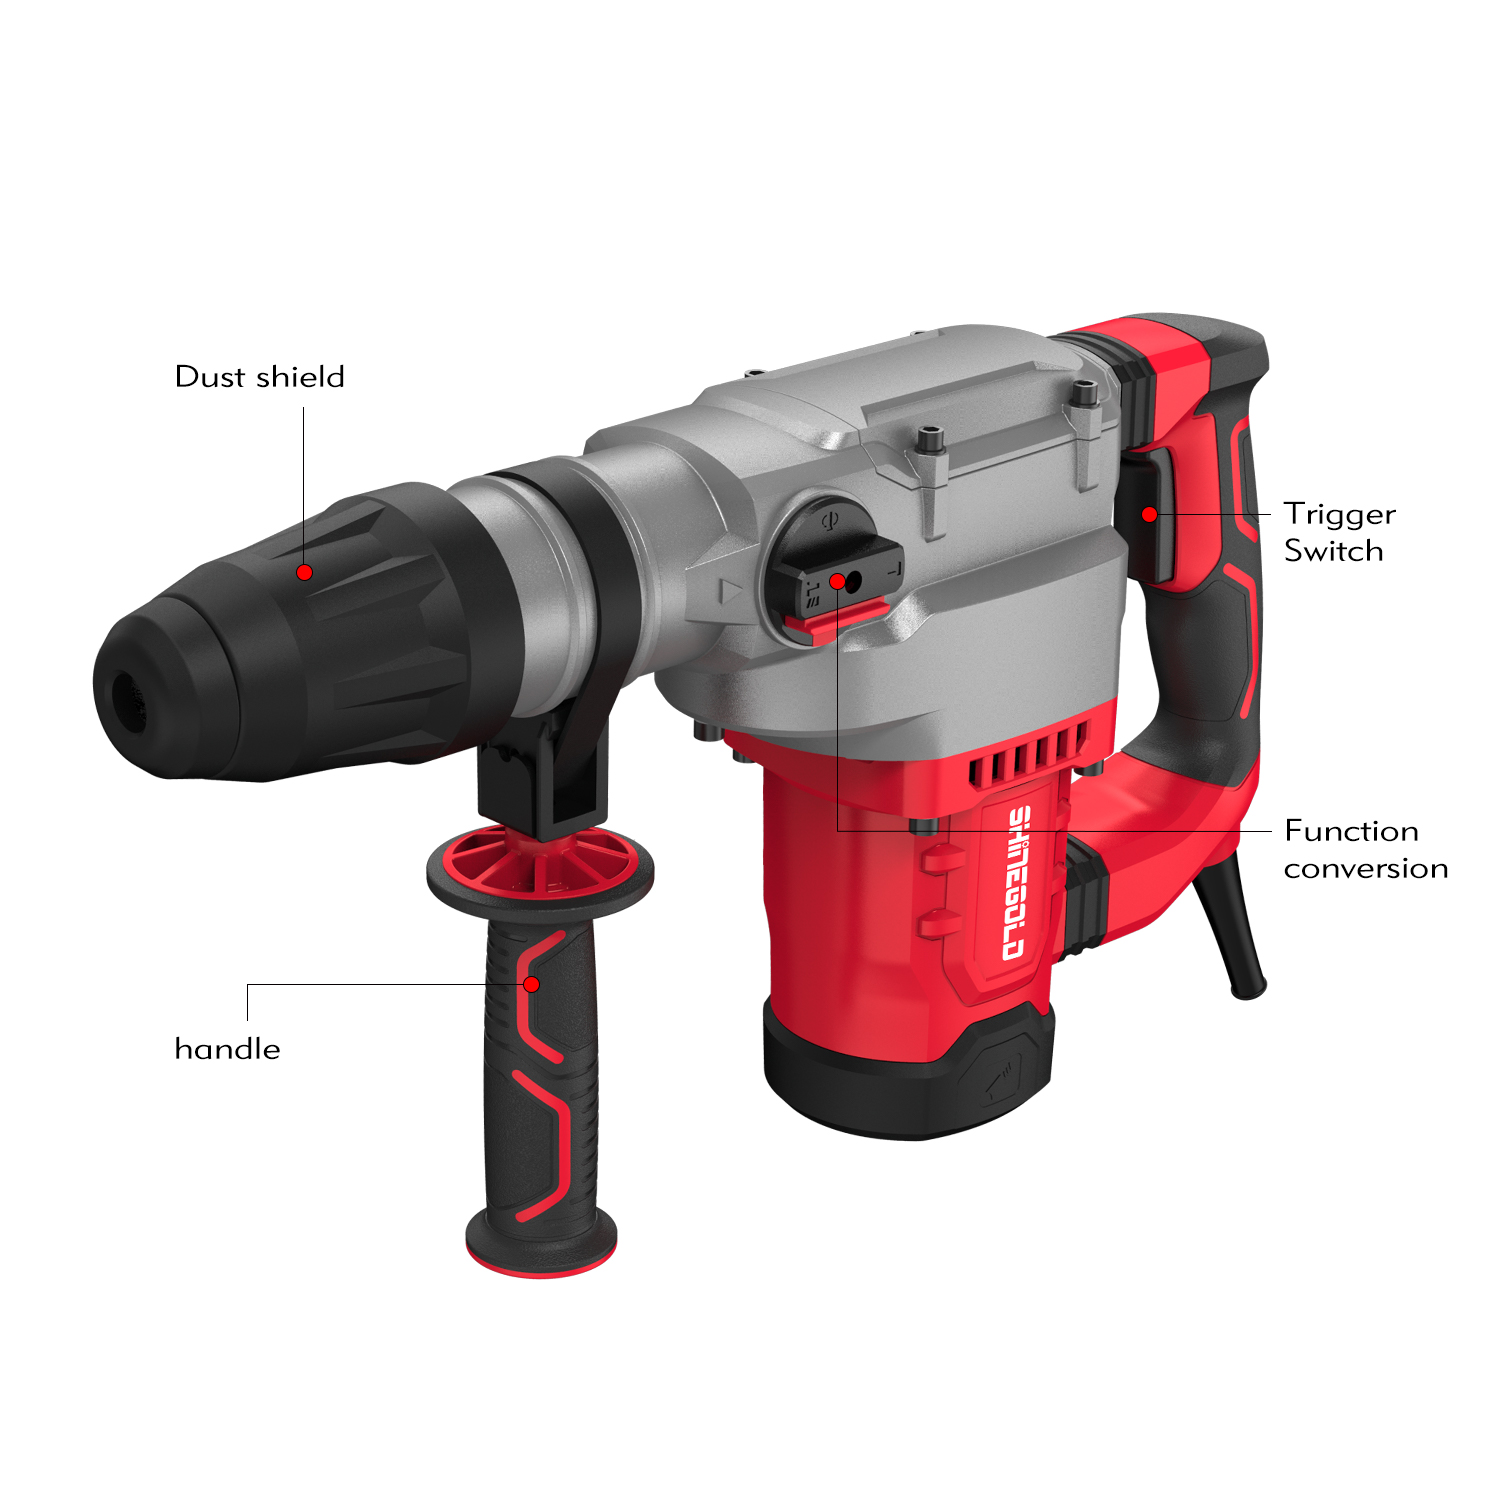 What type of electric impact tool is normally used to drill holes in concrete?